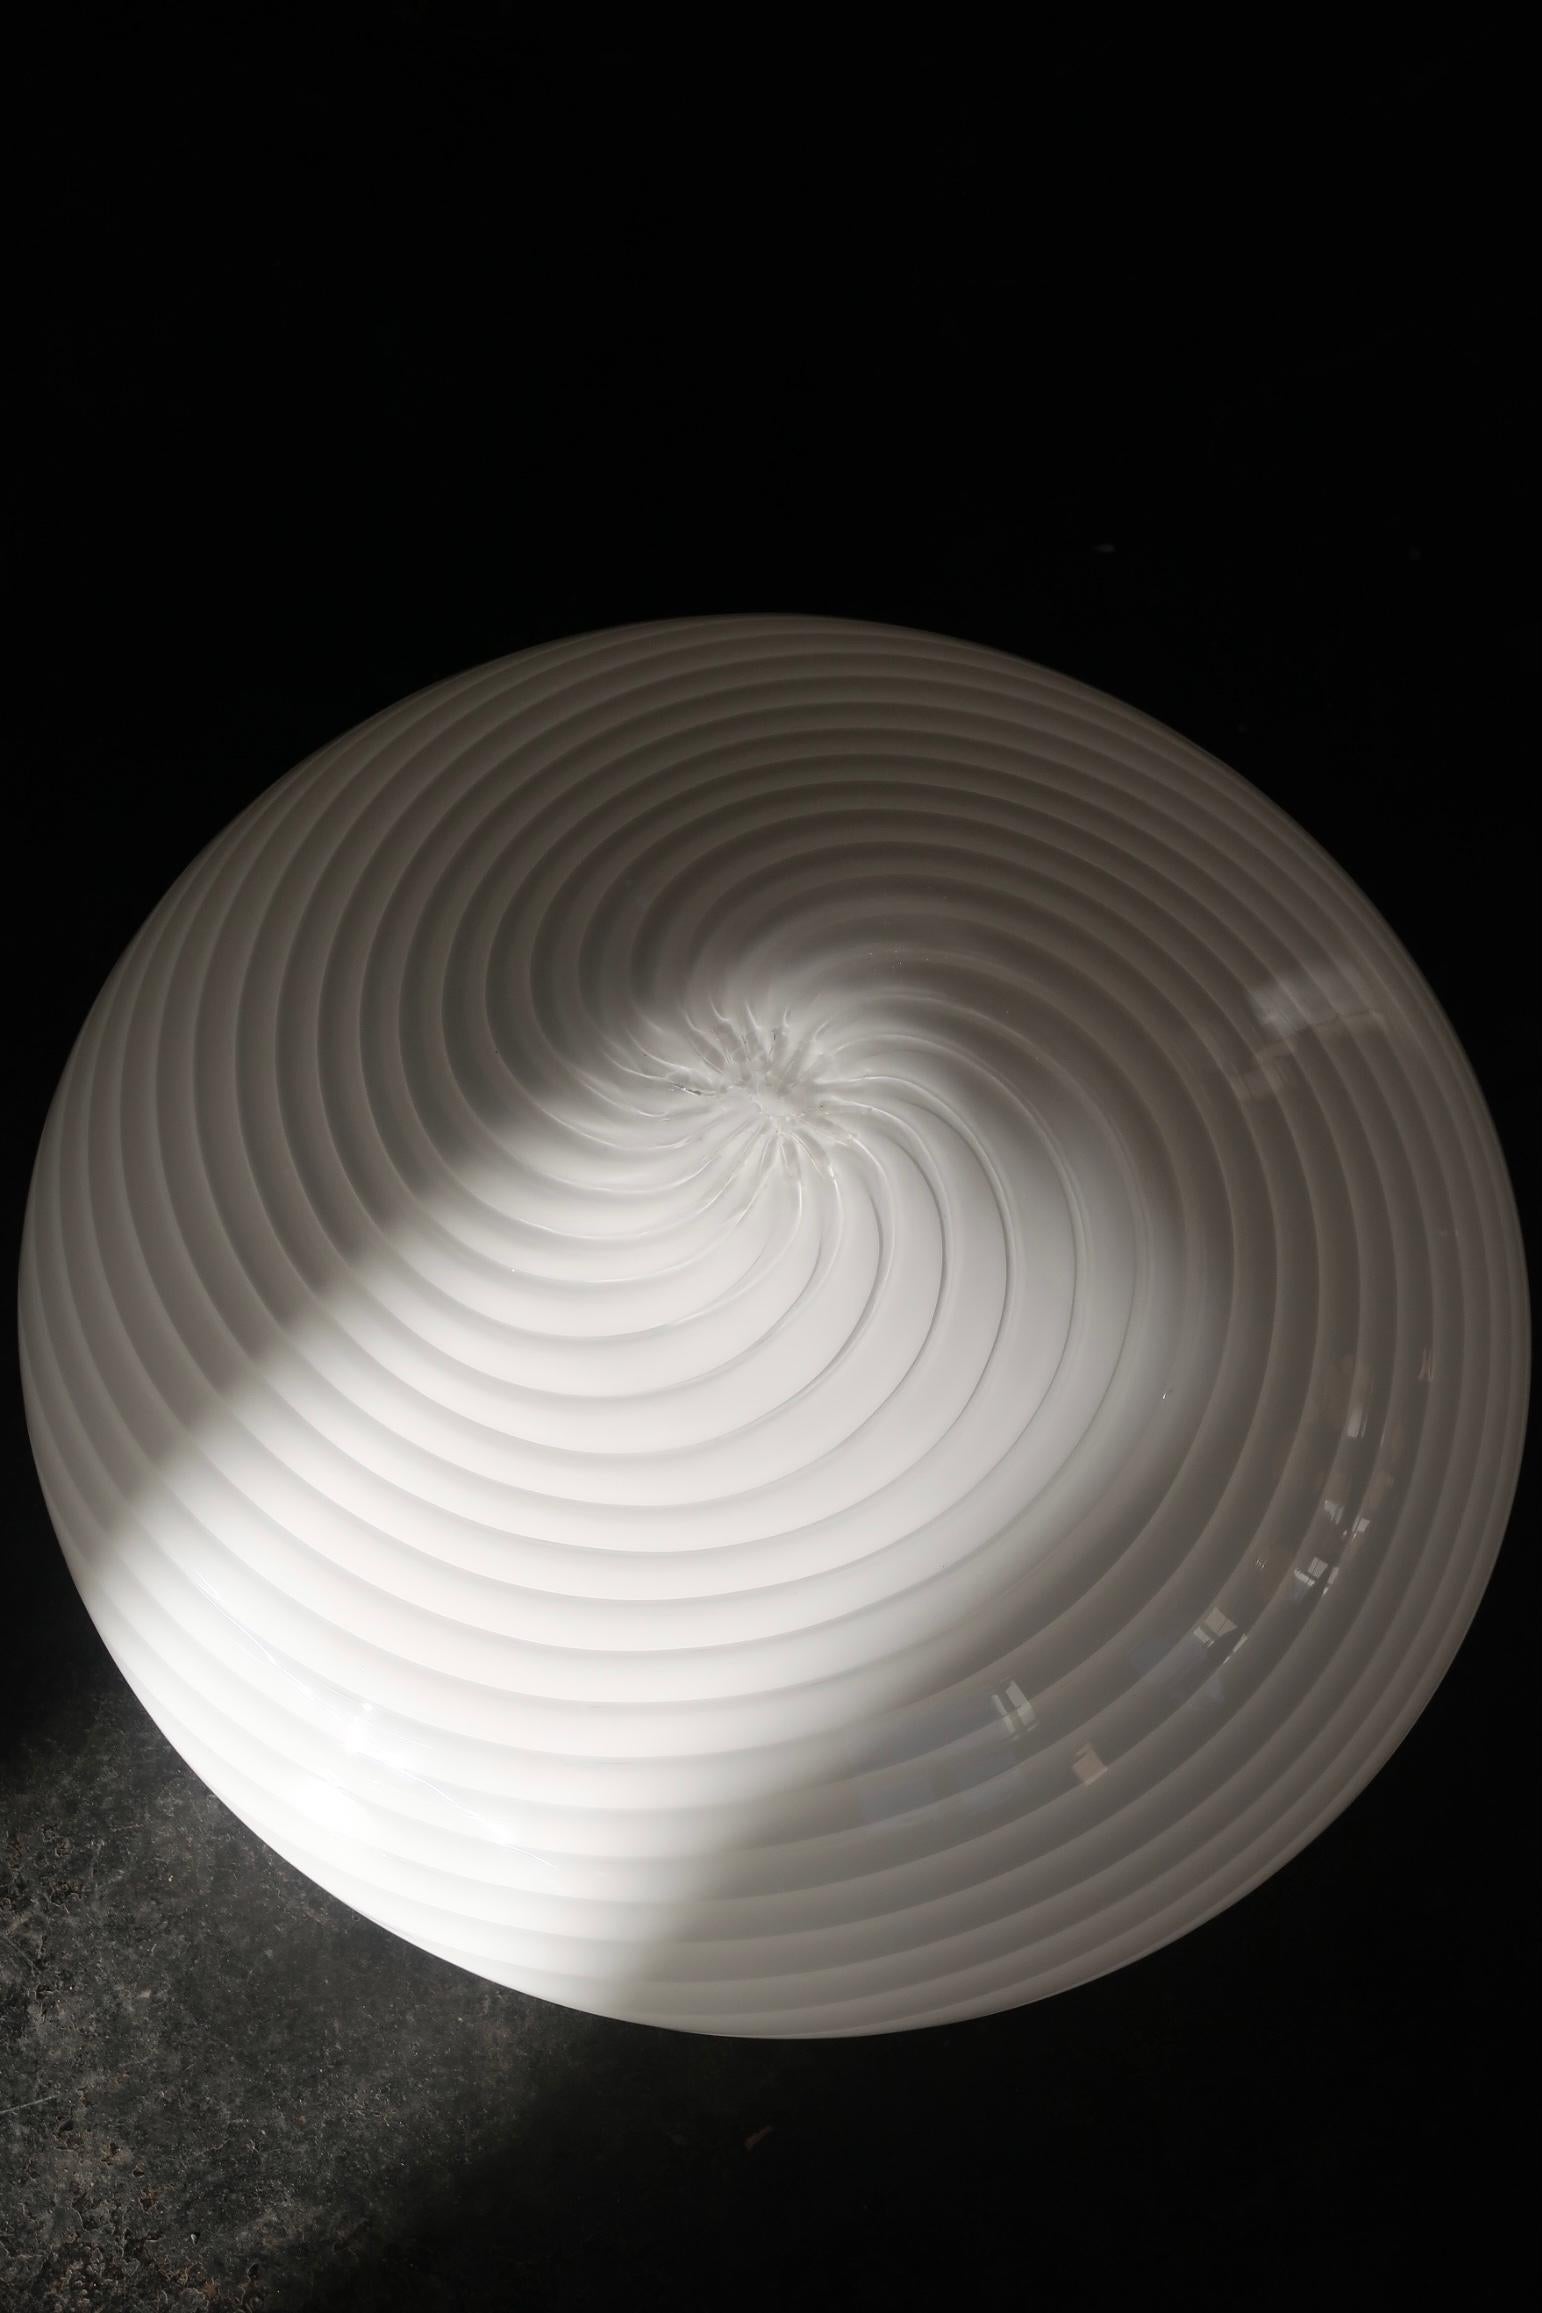 Vintage Murano plafond ceiling lamp / wall lamp. Mouth-blown white opal glass with swirl and white metal base. Handmade in Italy, 1970s. D: 42 cm⁠⁠ H: 16 cm.

